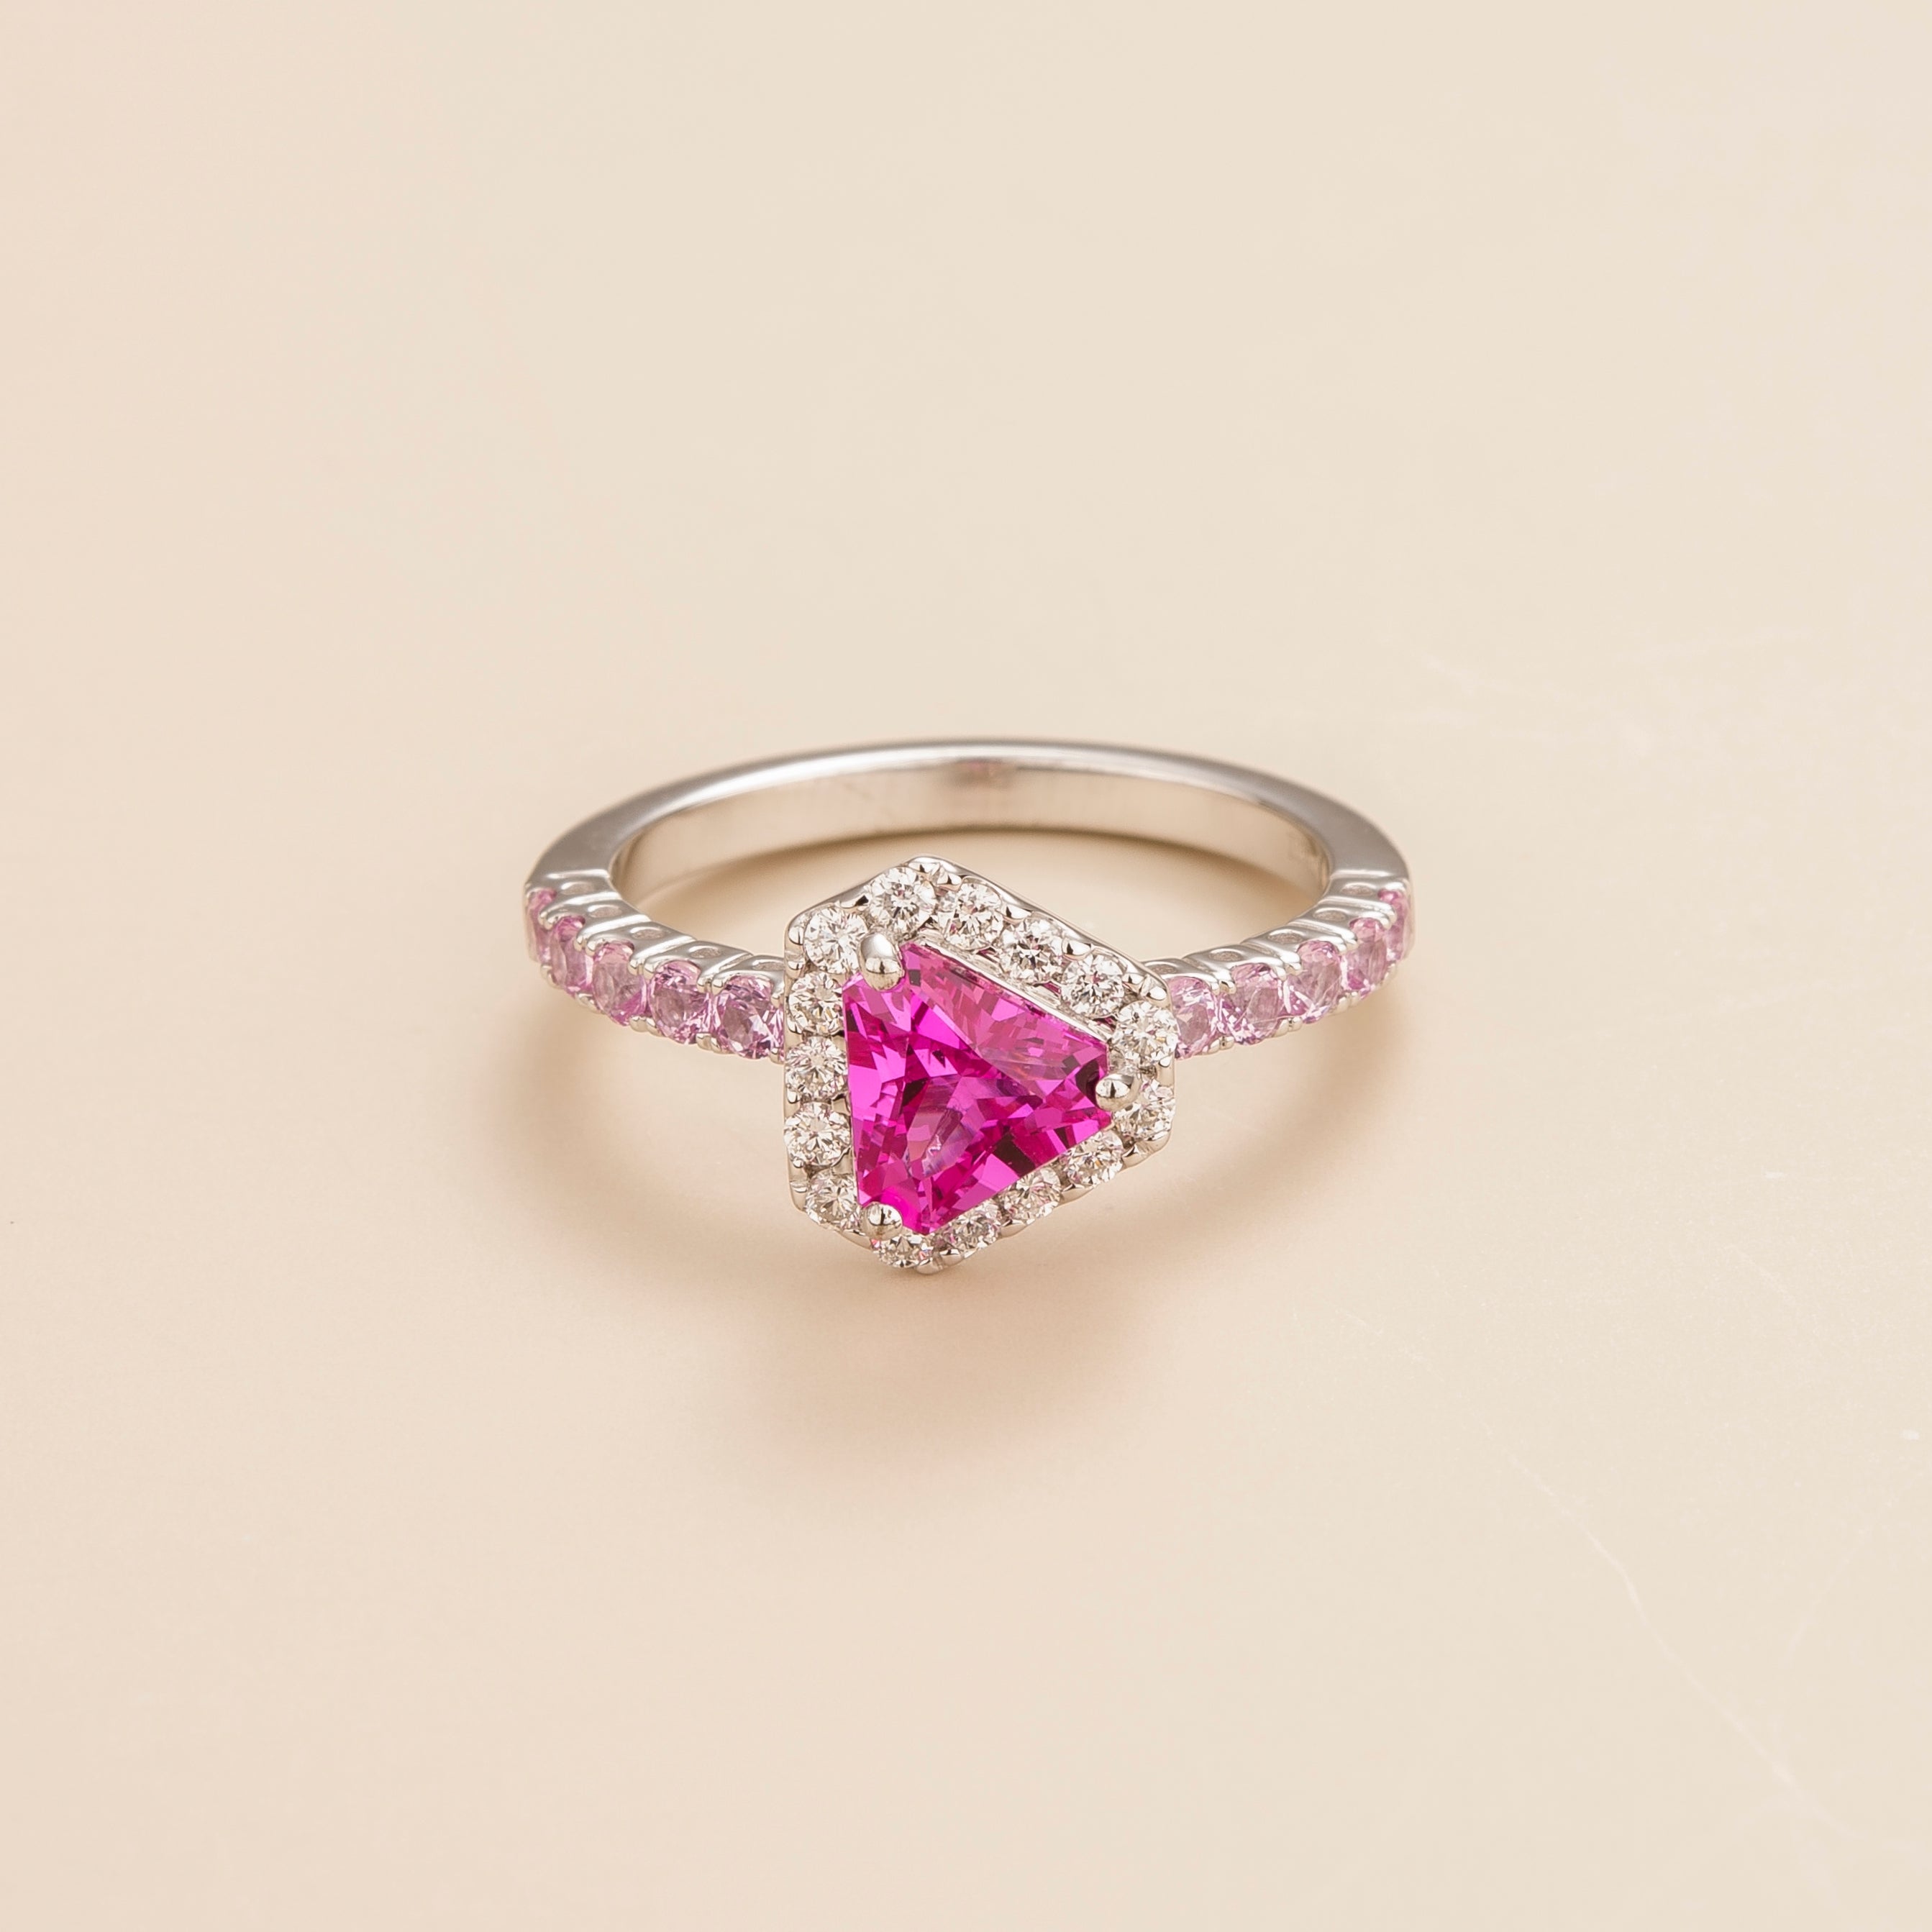 Diana ring in 18K white gold vermeil set with lab grown diamond and triangle pink sapphire gem stones. Perfect for yourself and as gift.